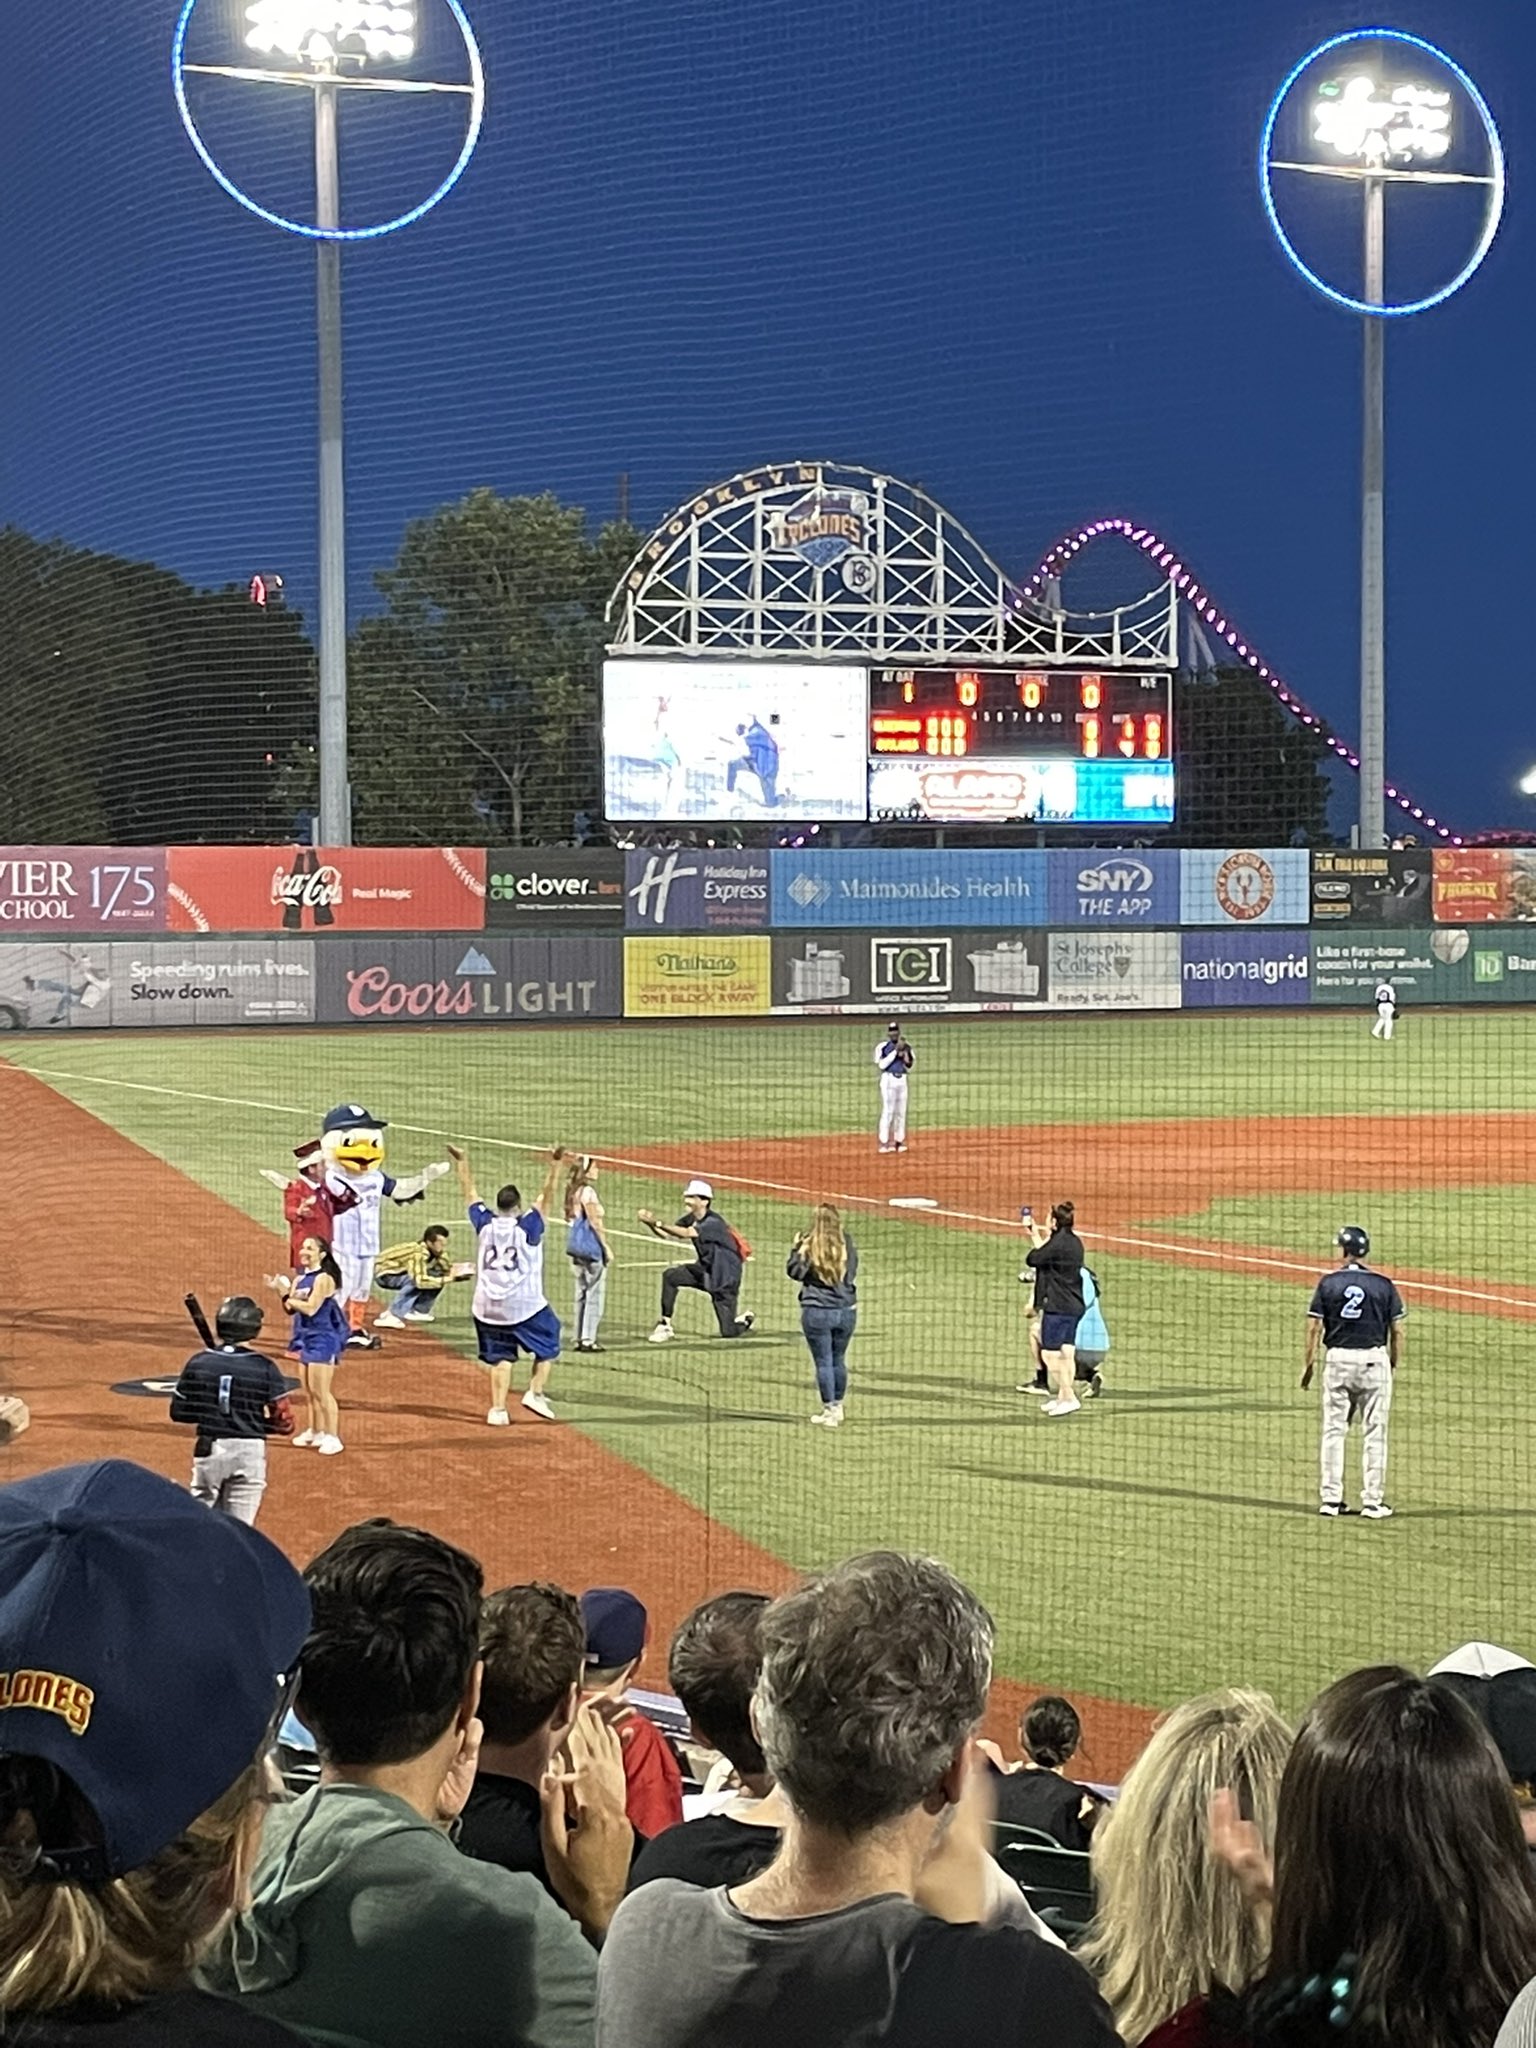 Brooklyn Cyclones - As part of our NYPL Championship celebration